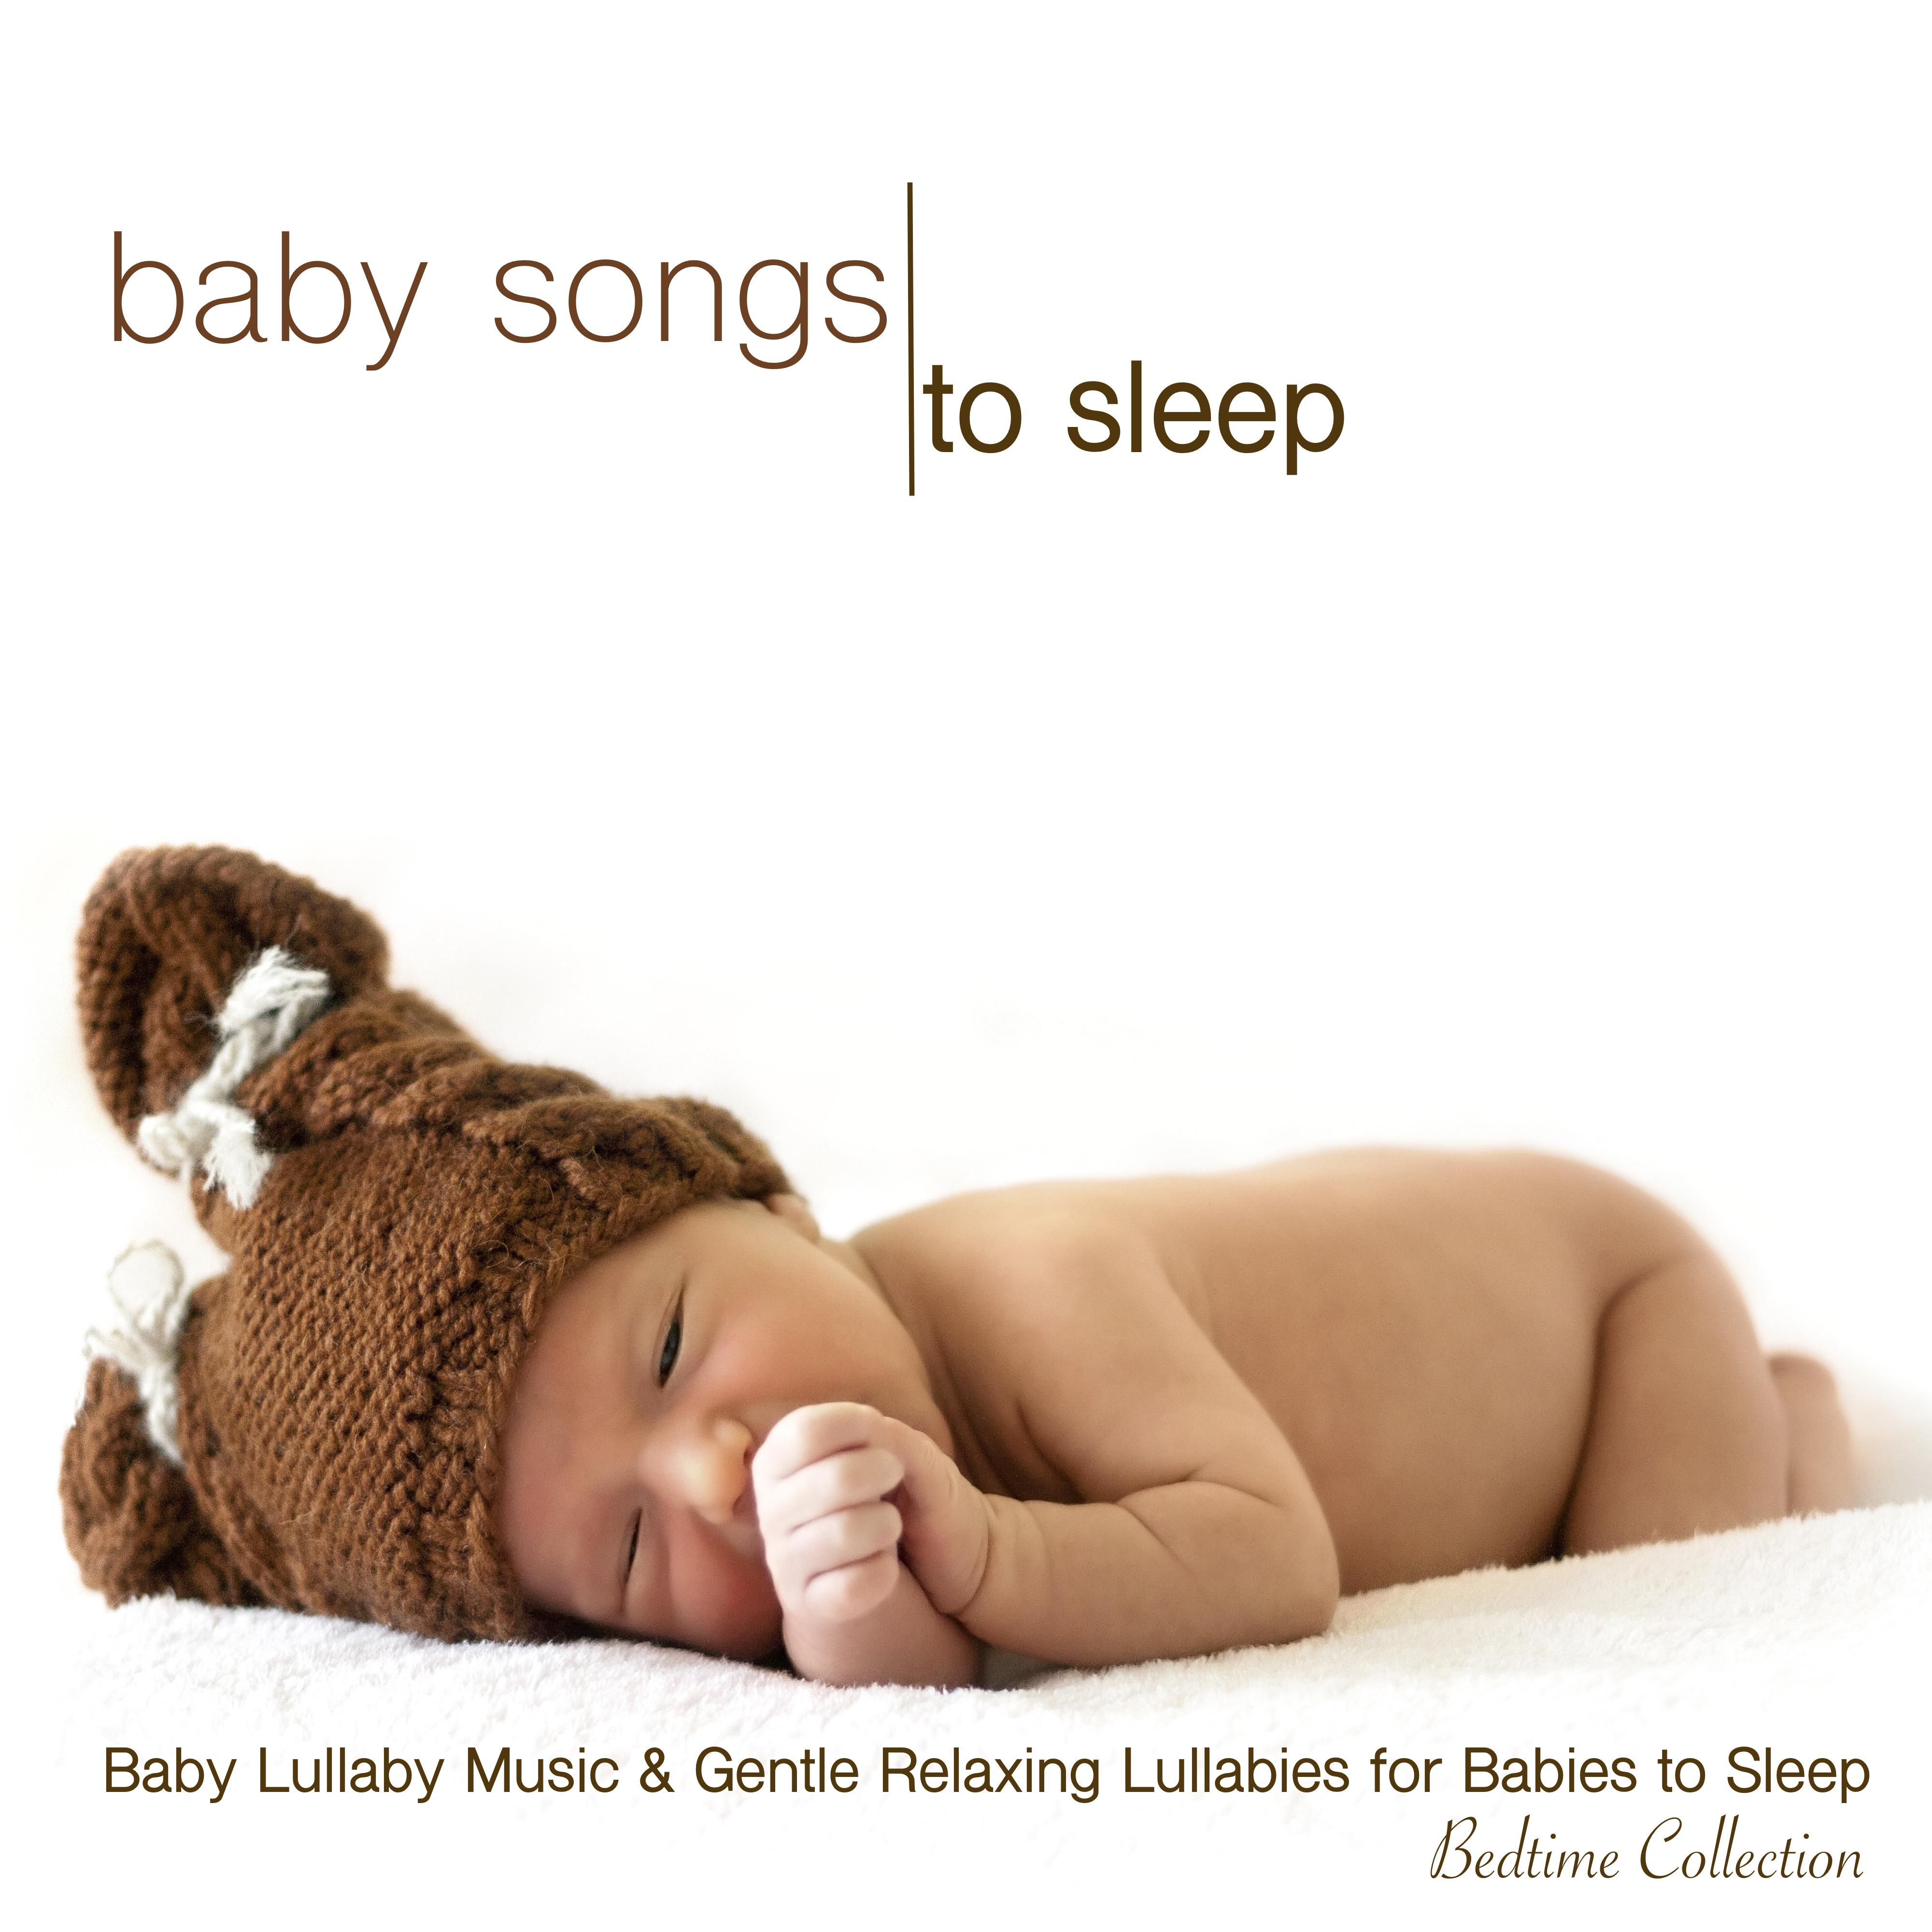 Baby Songs to Sleep - Baby Lullaby Music & Gentle Relaxing Lullabies for Babies to Sleep (Bedtime Collection)